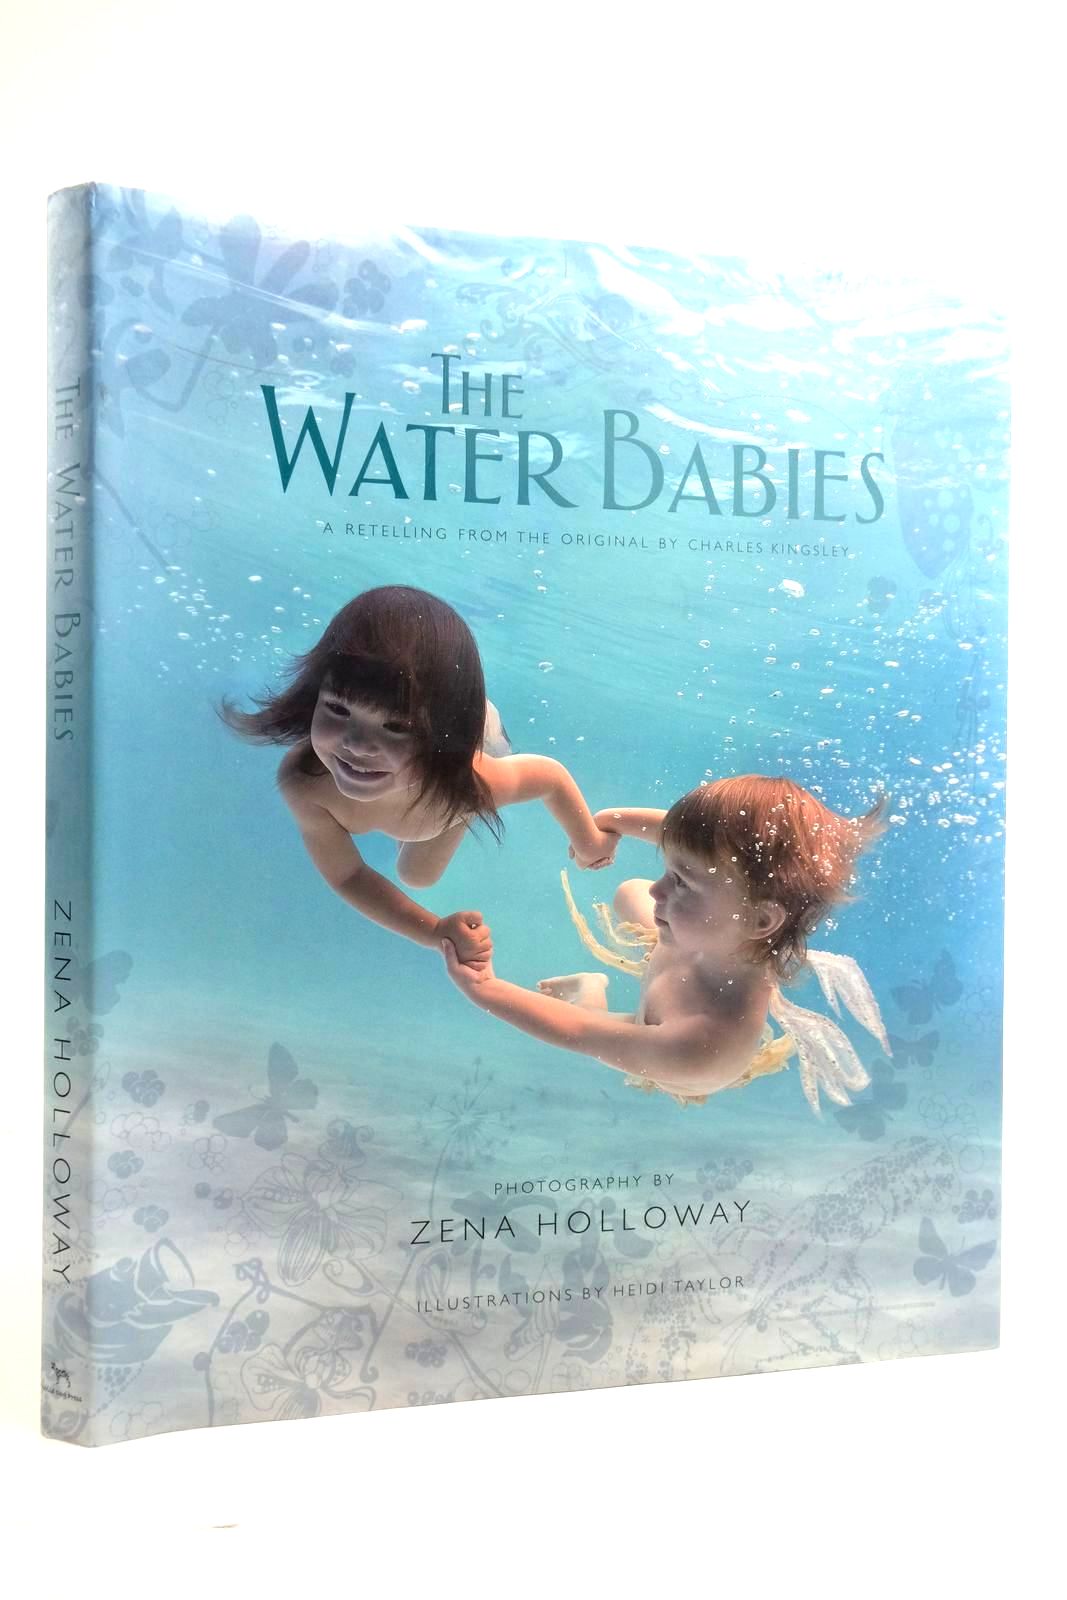 Photo of THE WATER BABIES: A RETELLING written by Kingsley, Charles illustrated by Taylor, Heidi published by Wild Dog Press (STOCK CODE: 2136368)  for sale by Stella & Rose's Books